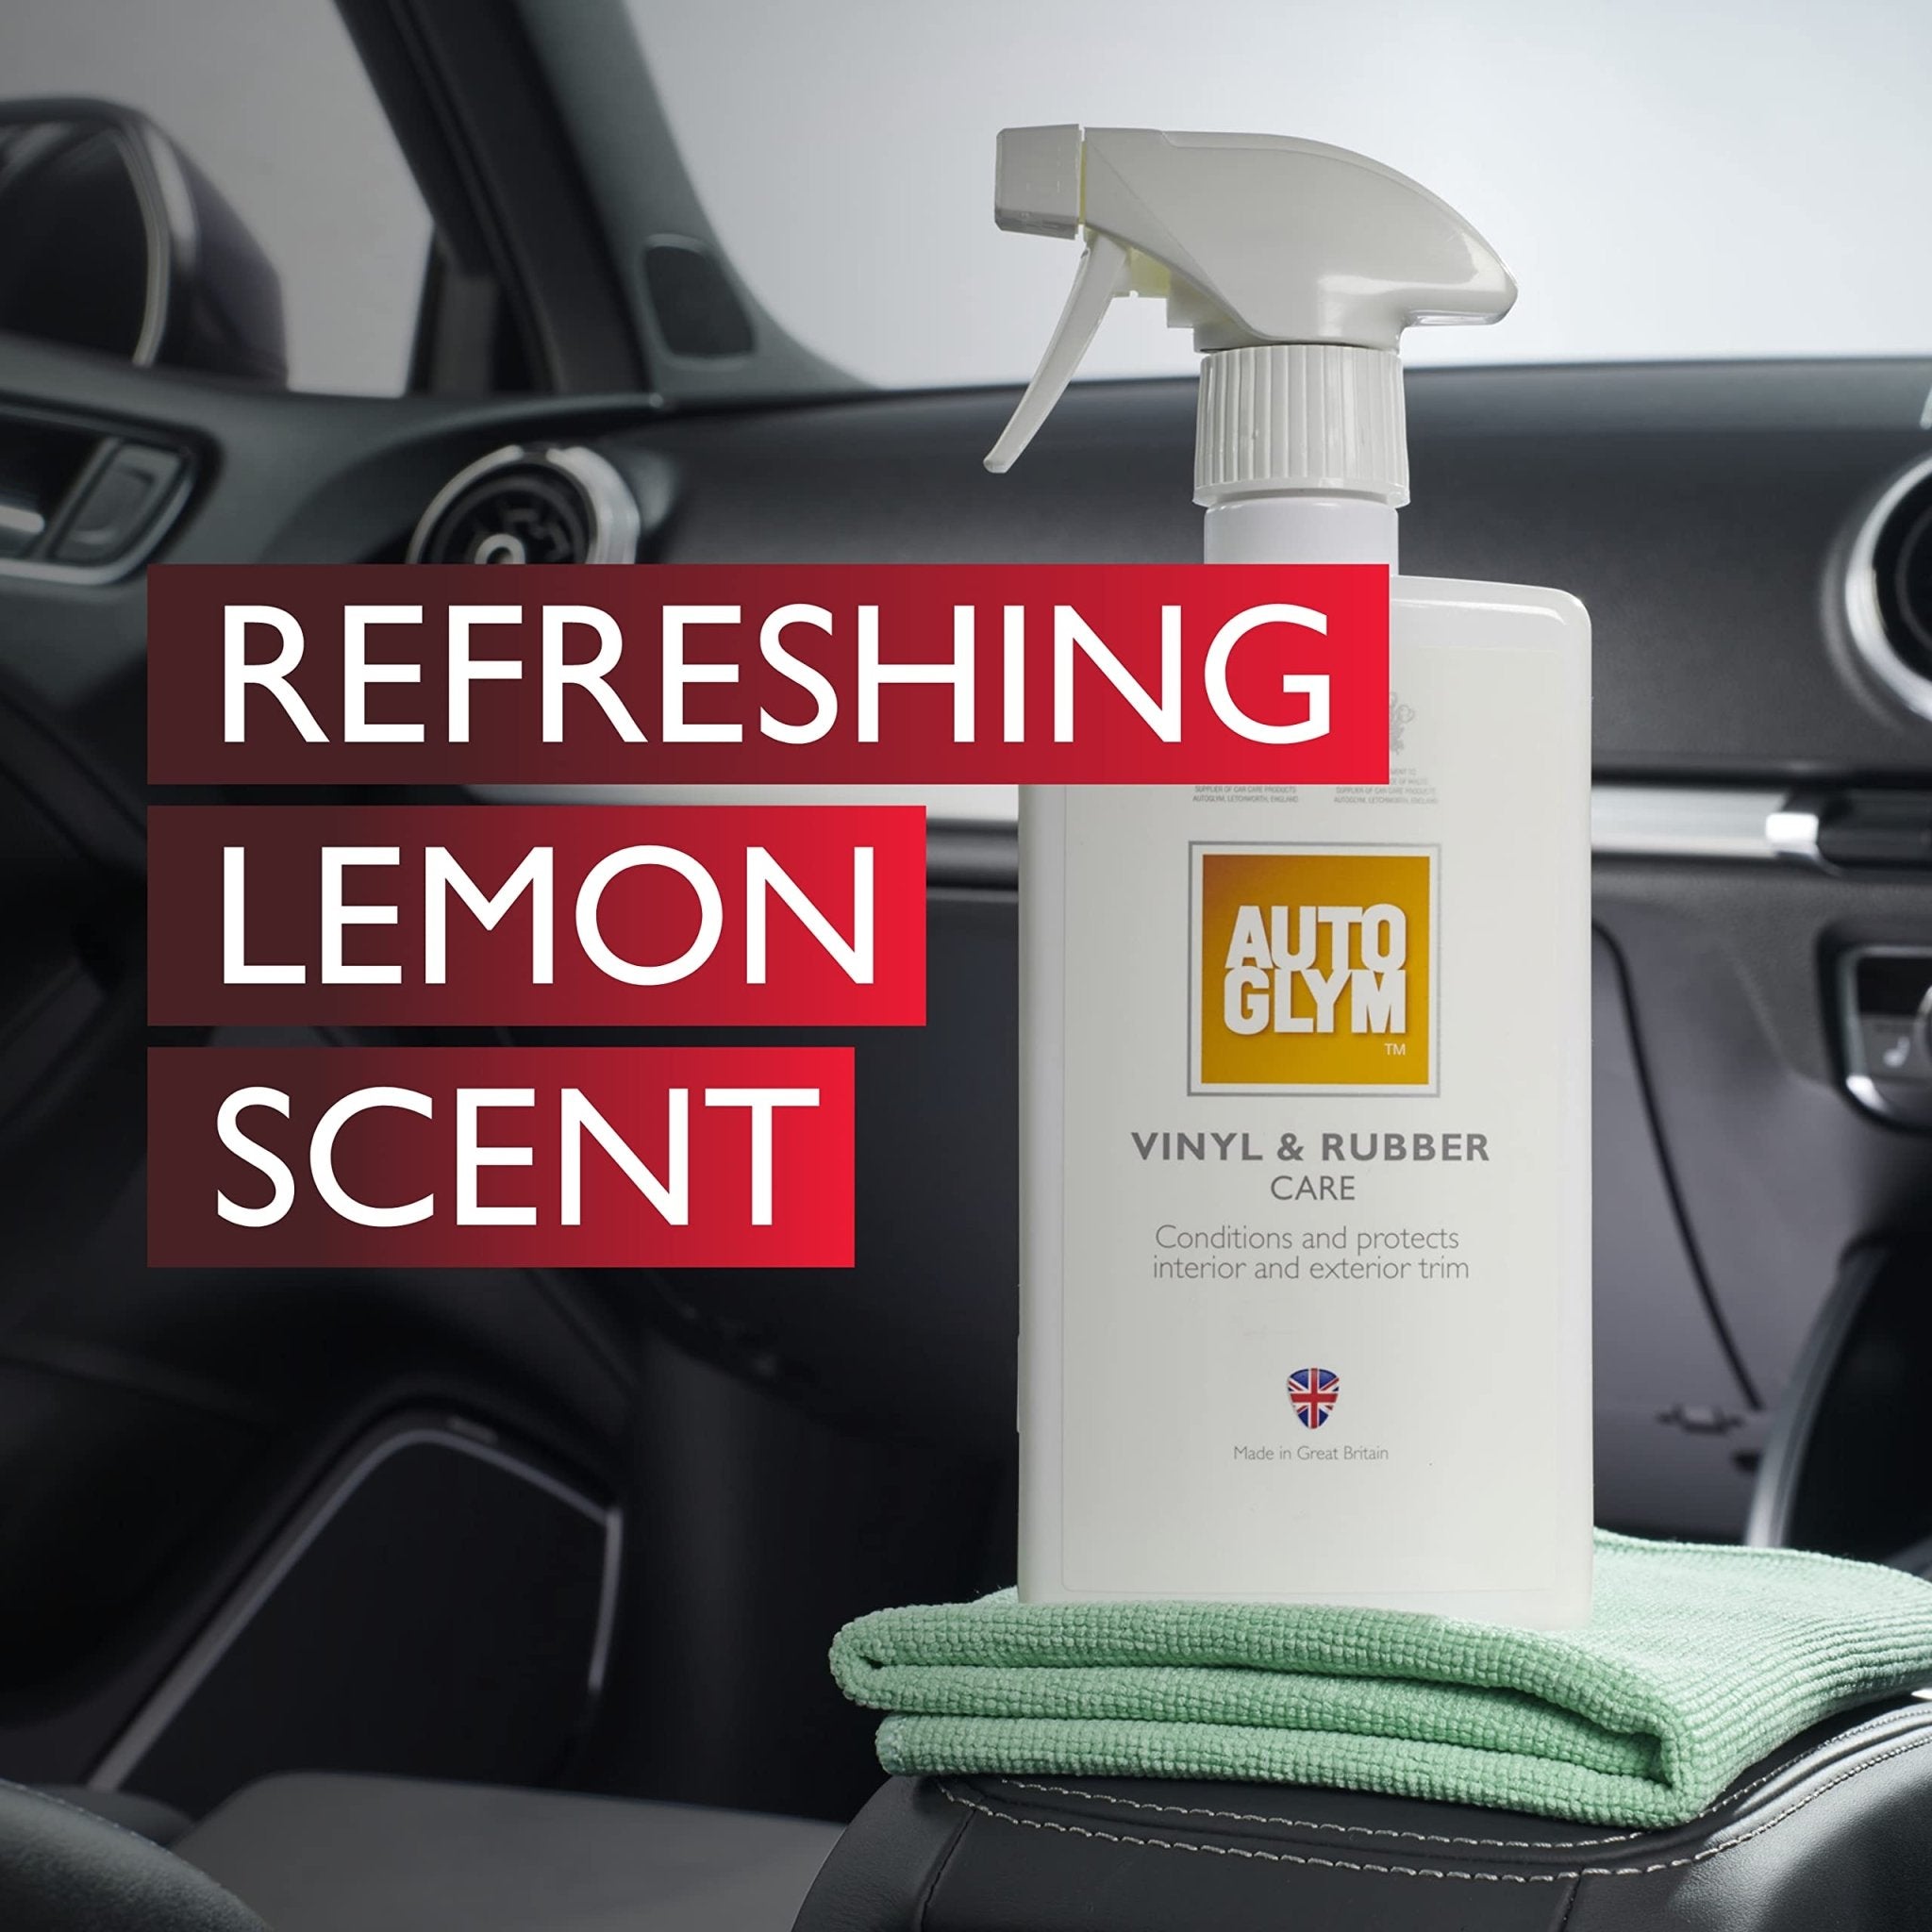 Autoglym Vinyl And Rubber Care, 500ml - Fresh Lemon Scented Interior Car Cleaner Spray Designed To Protect Your Dashboard and Other Interior Plastics - Ammpoure Wellbeing